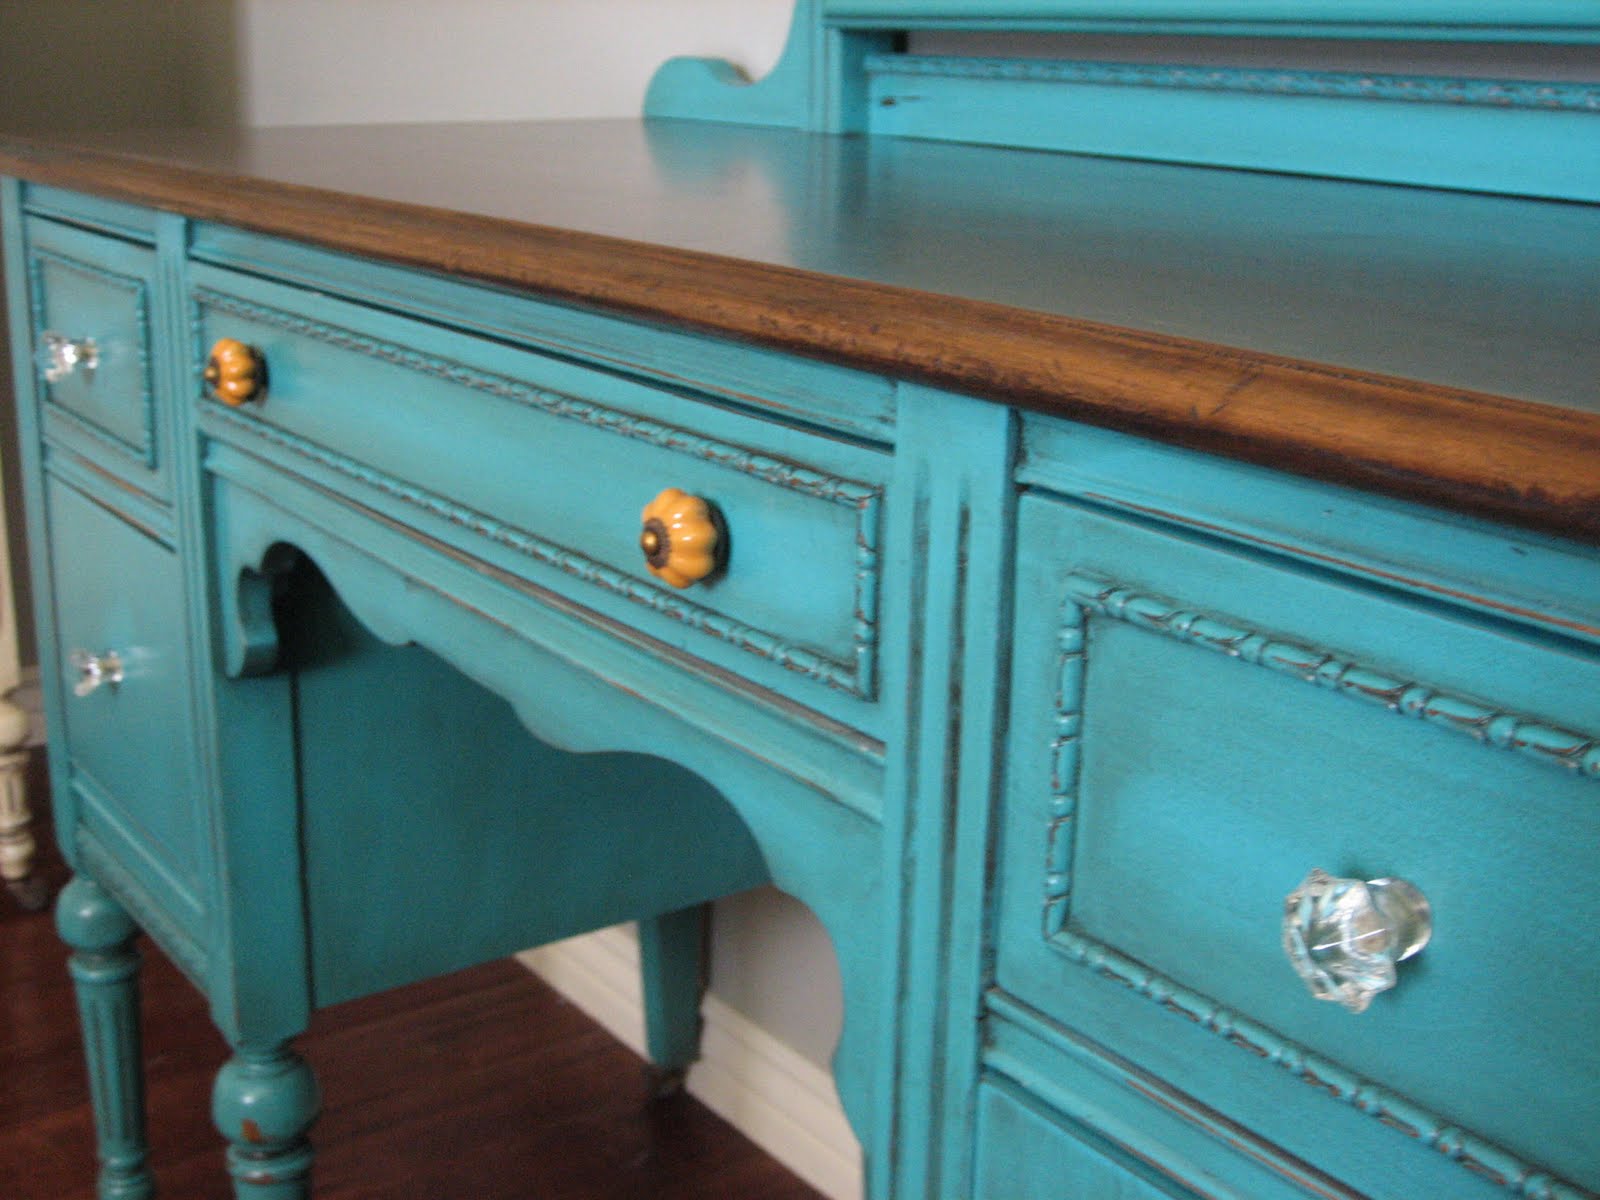 European Paint Finishes: ~ Turquoise/Teal & Cream Bedroom Set